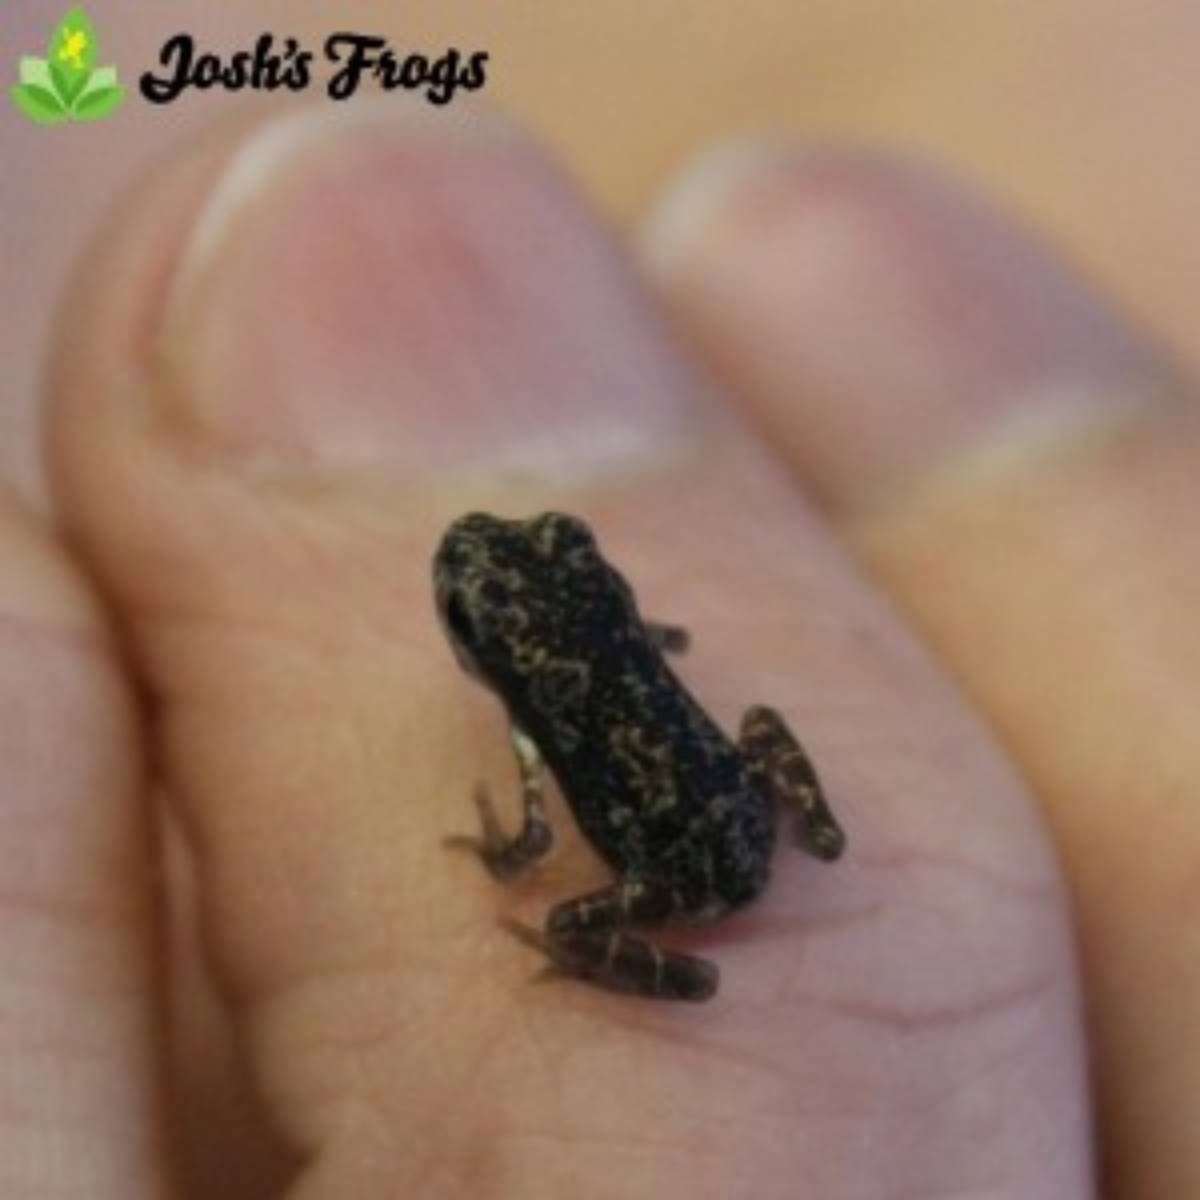 yellow spotted climbing toad pedostibes hosii for sale captive bred Josh's frogs toadlet baby toad on finger